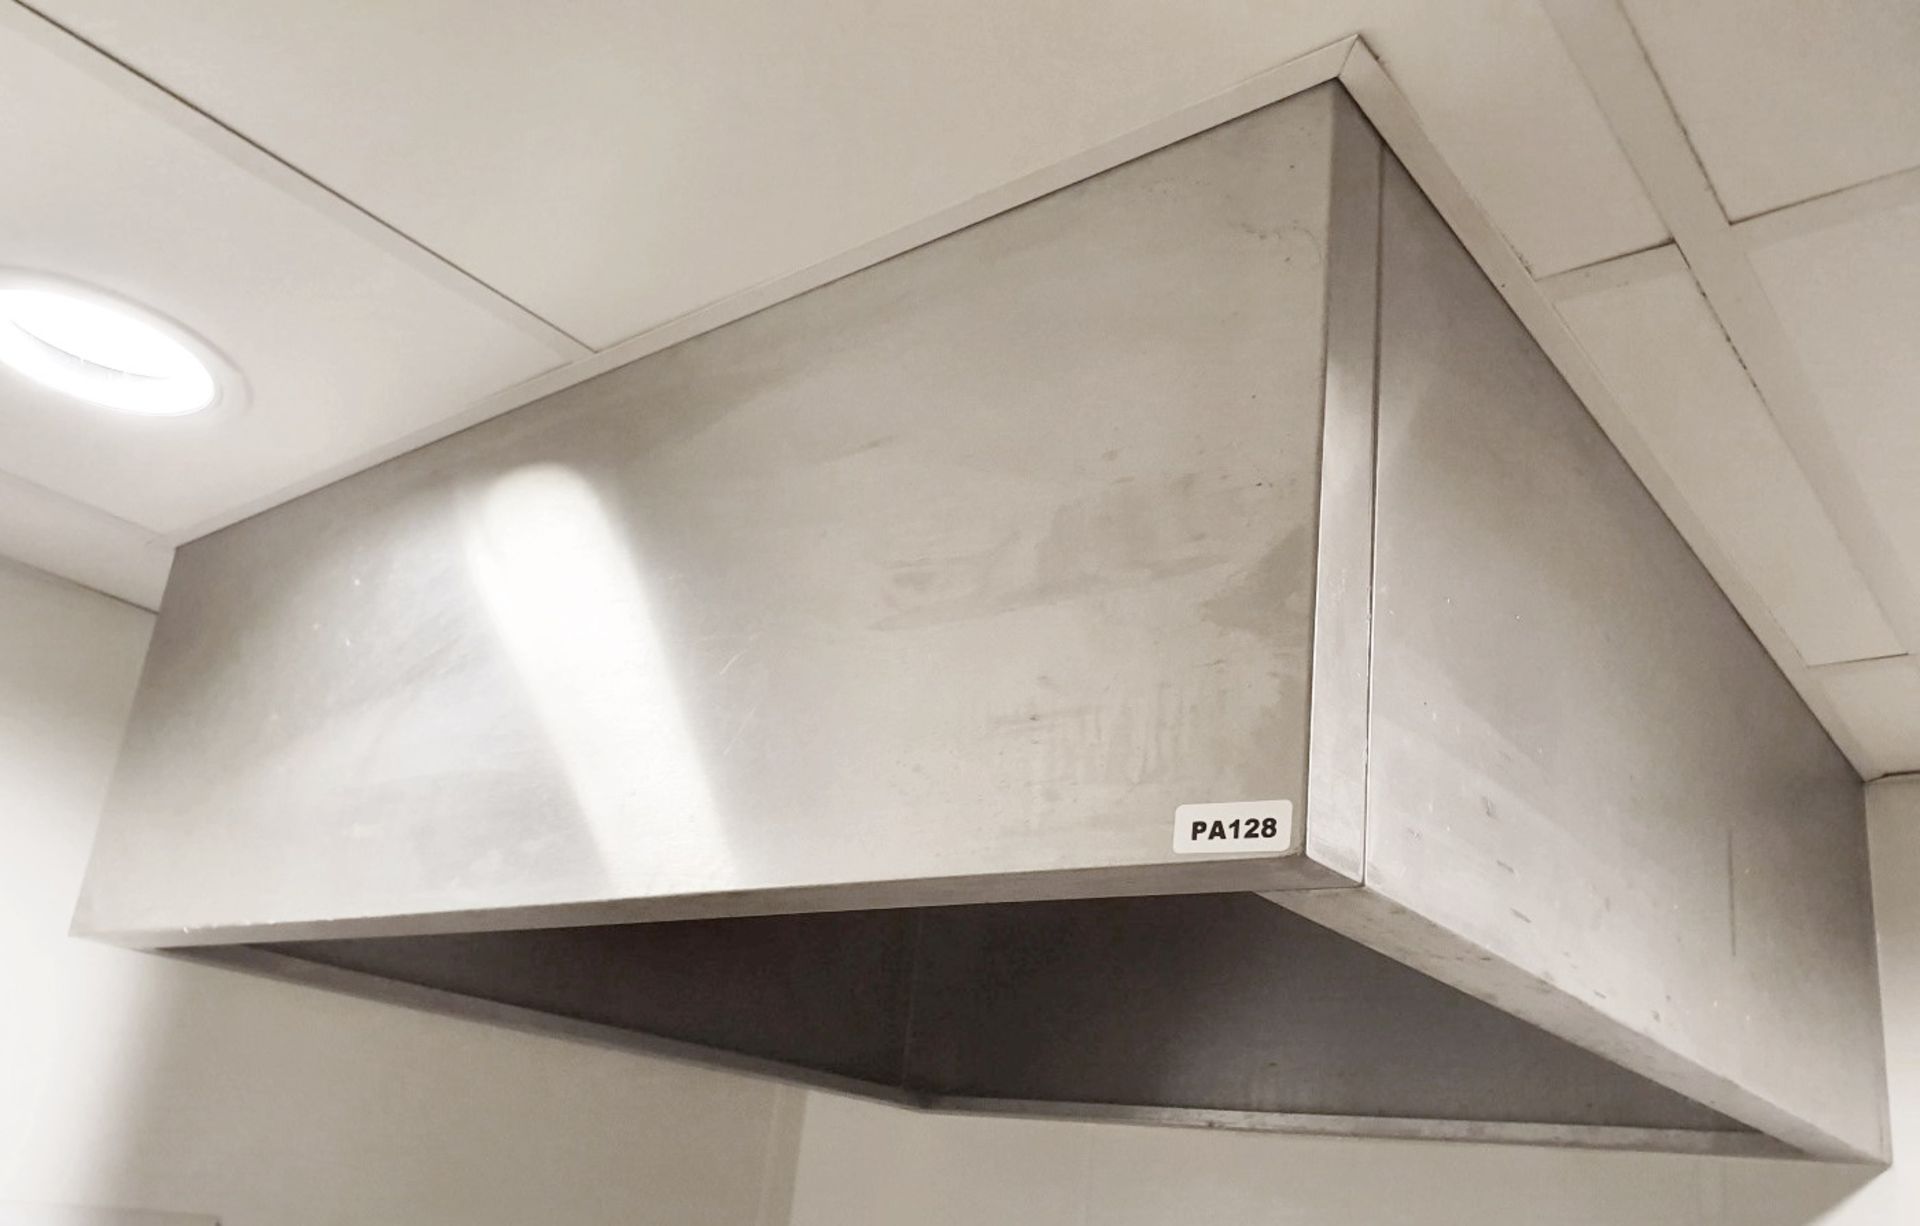 1 x Stainless Steel Extractor Canopy Hood - H46 x W110 x D110 cms - Ref PA128 - CL463 - Location: